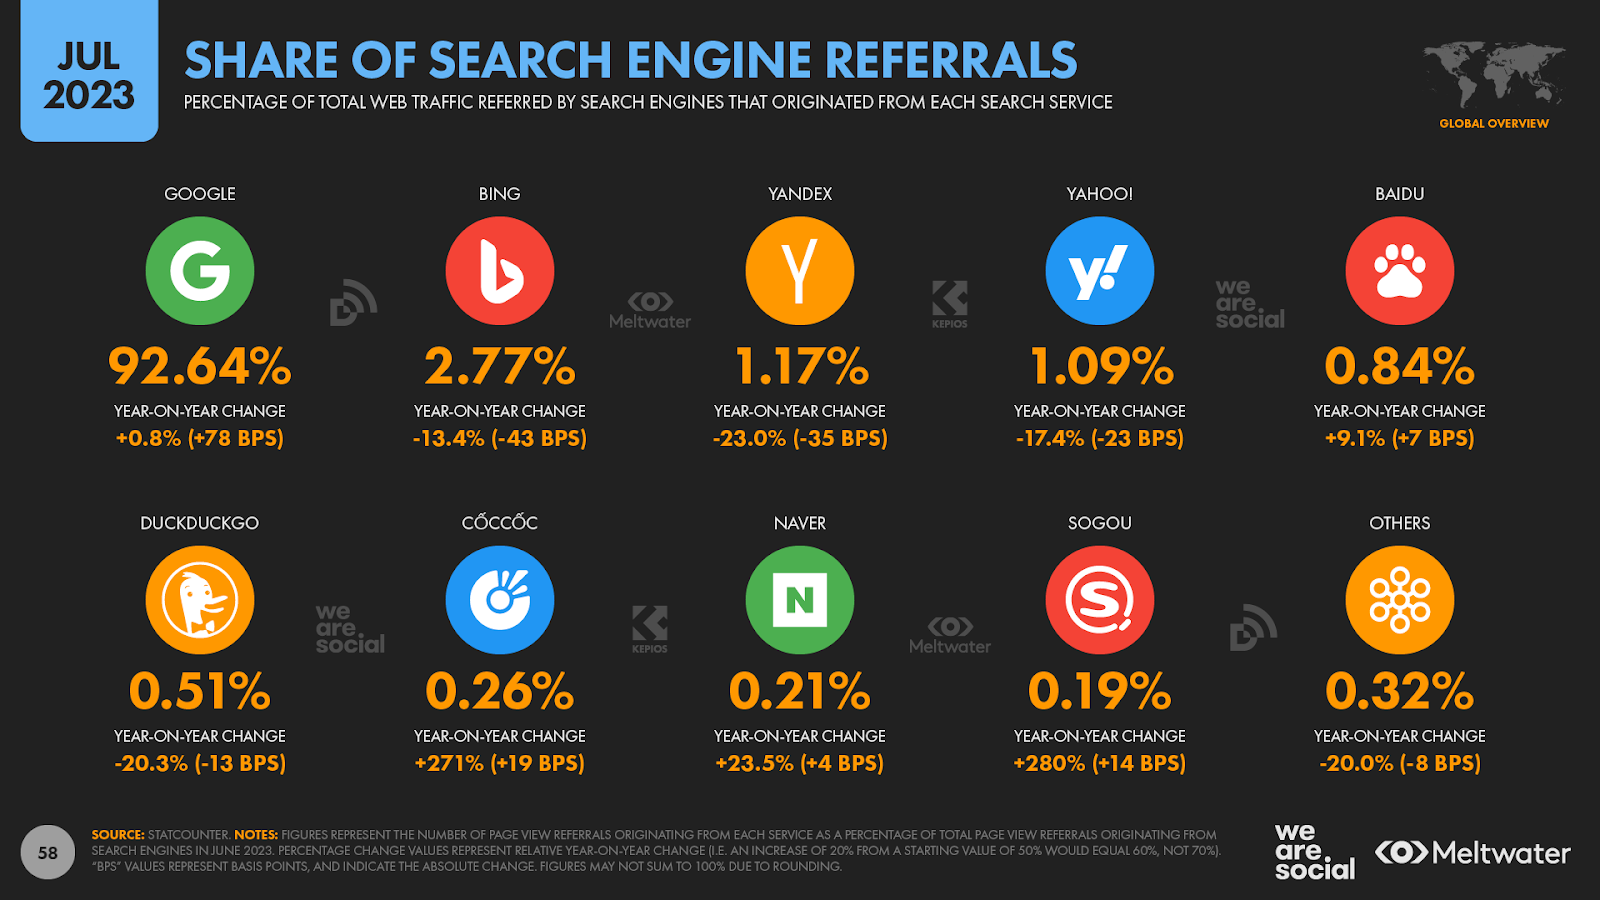 DataReportal's infographic showing share of search engine referrals